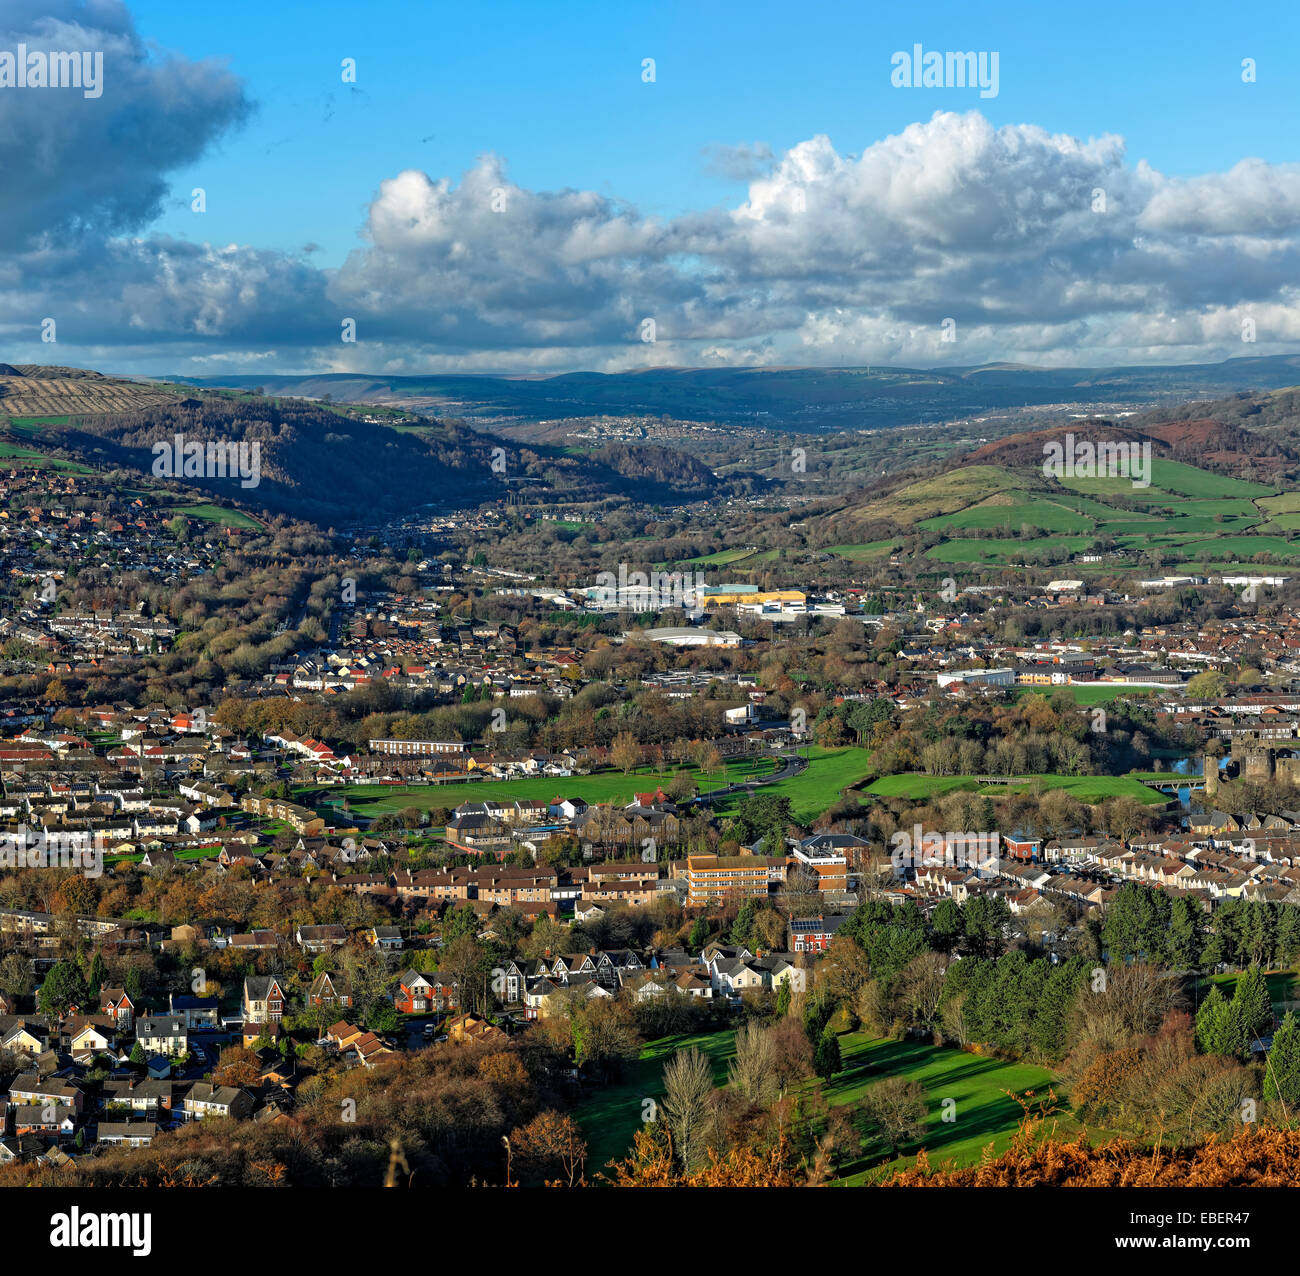 View of a town nestled in a river valley, typical of the mining towns of the South Wales Valleys Stock Photo